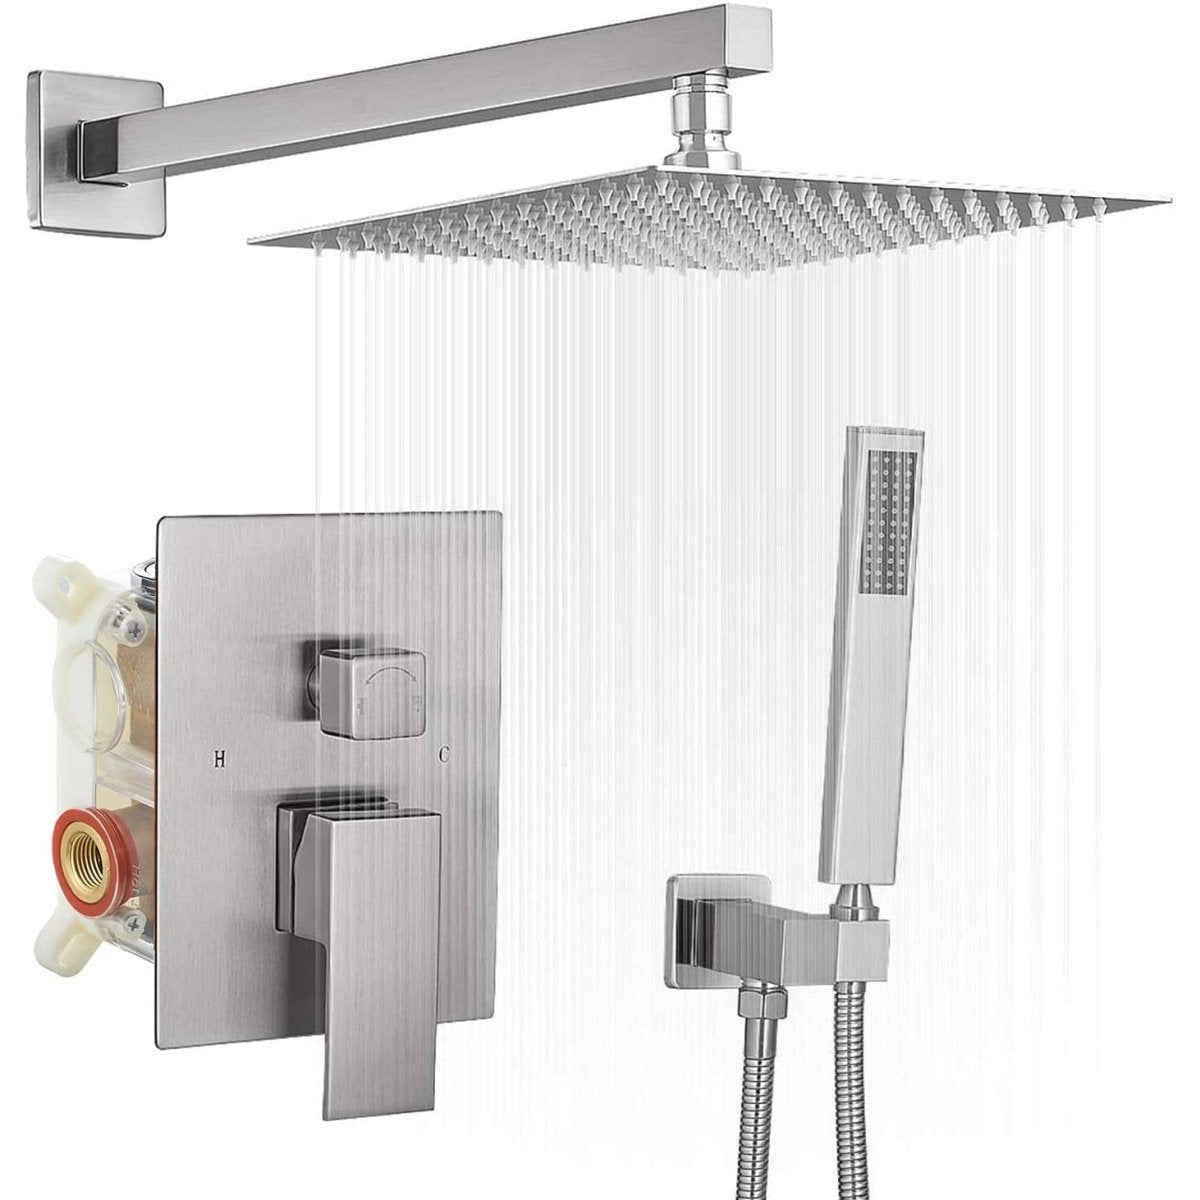 10 Inch Square Bathroom Shower Combo Set in Brushed Nickel-1 - buyfaucet.com